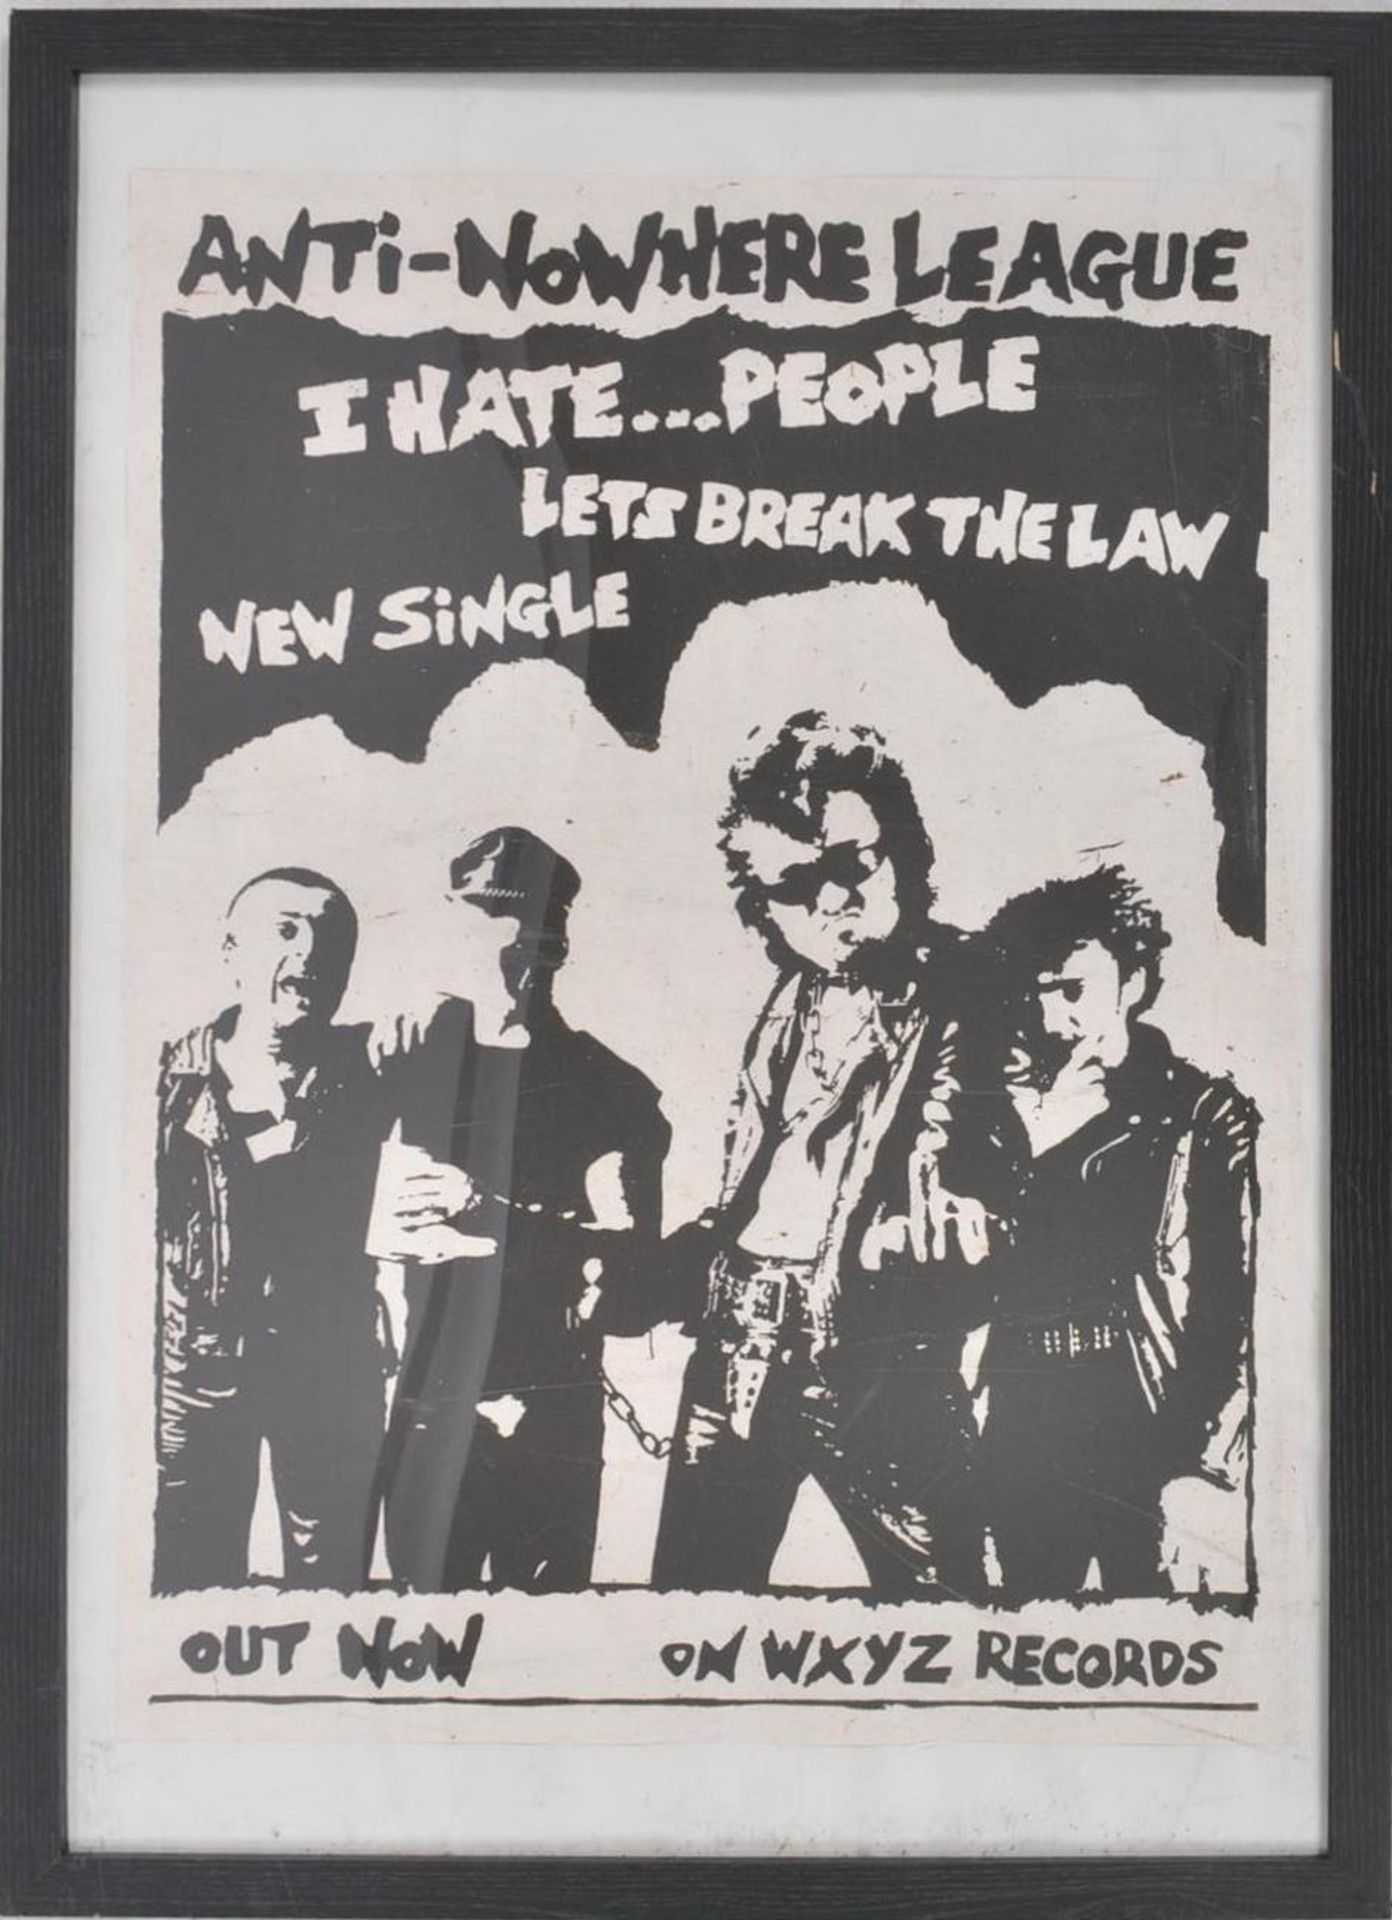 ANTI-NOWHERE LEAGUE - CONTEMPORARY MUSIC POSTER